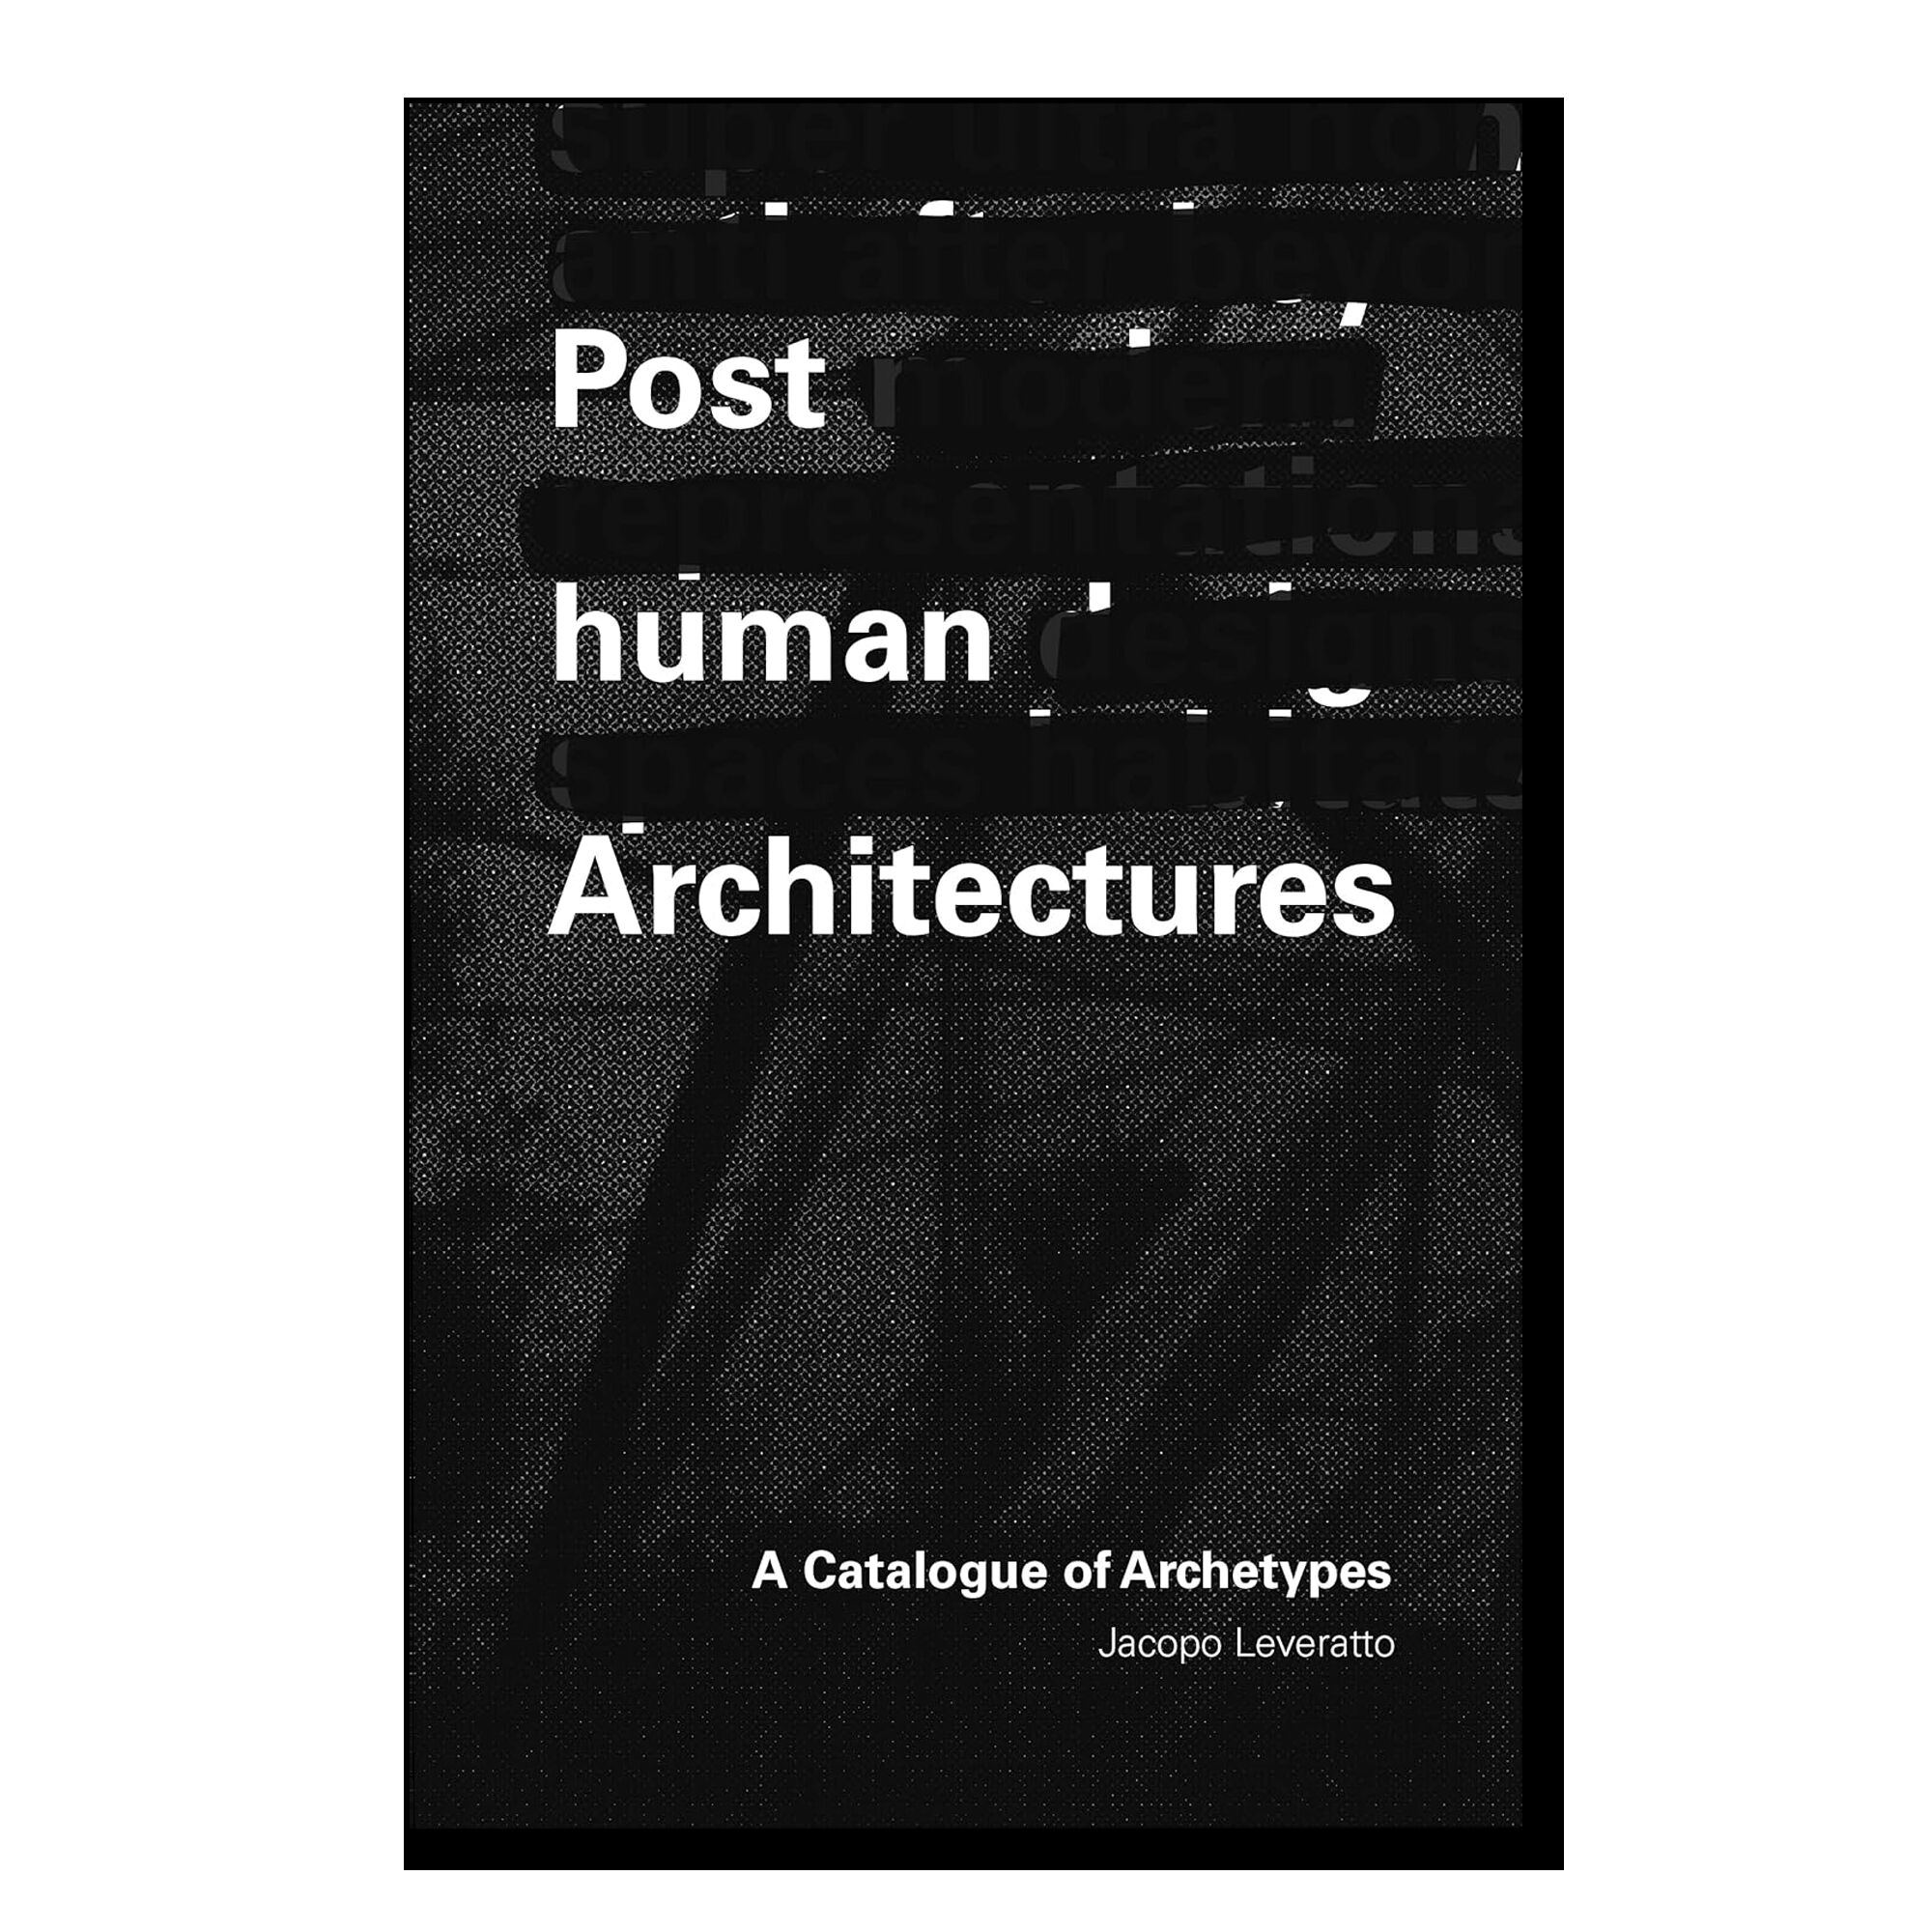 Posthuman Architecture: A Catalogue of Archetypes